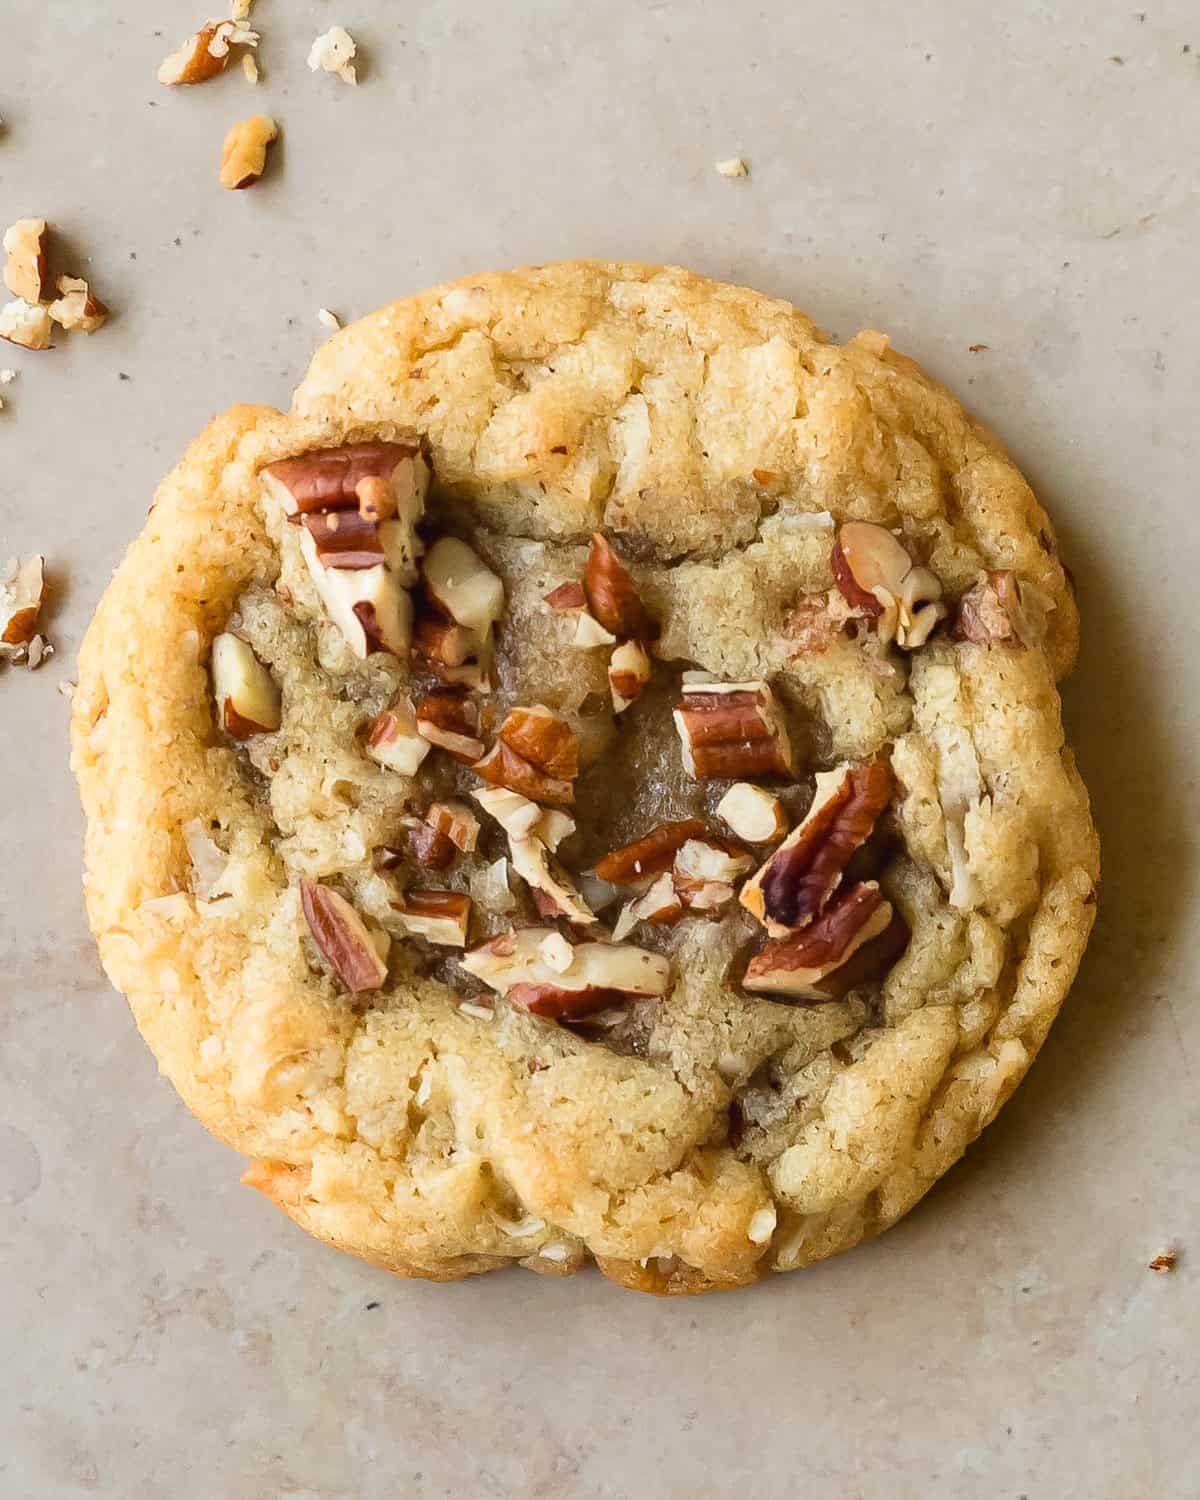 Coconut pecan cookies are soft, chewy and buttery sugar cookies filled with shredded coconut and toasted pecans. What I love most about this coconut pecan cookie recipe is that it’s almost no chill and is easy to make in one bowl. These pecan coconut cookies are the perfect cozy cookie to enjoy all year.